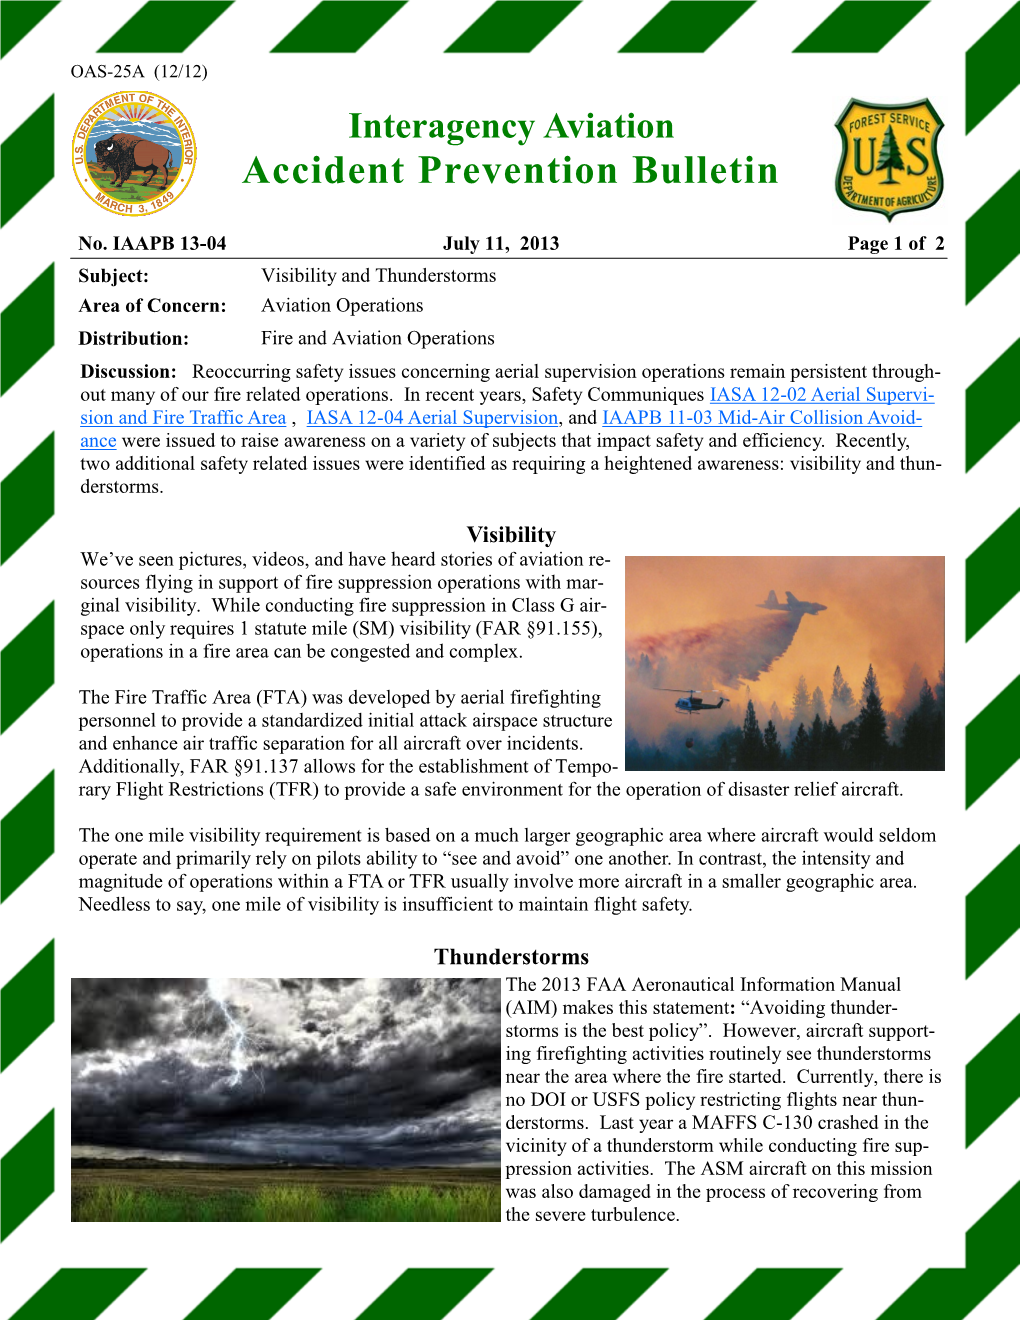 Interagency Aviation Accident Prevention Bulletin 13-04 Visibility